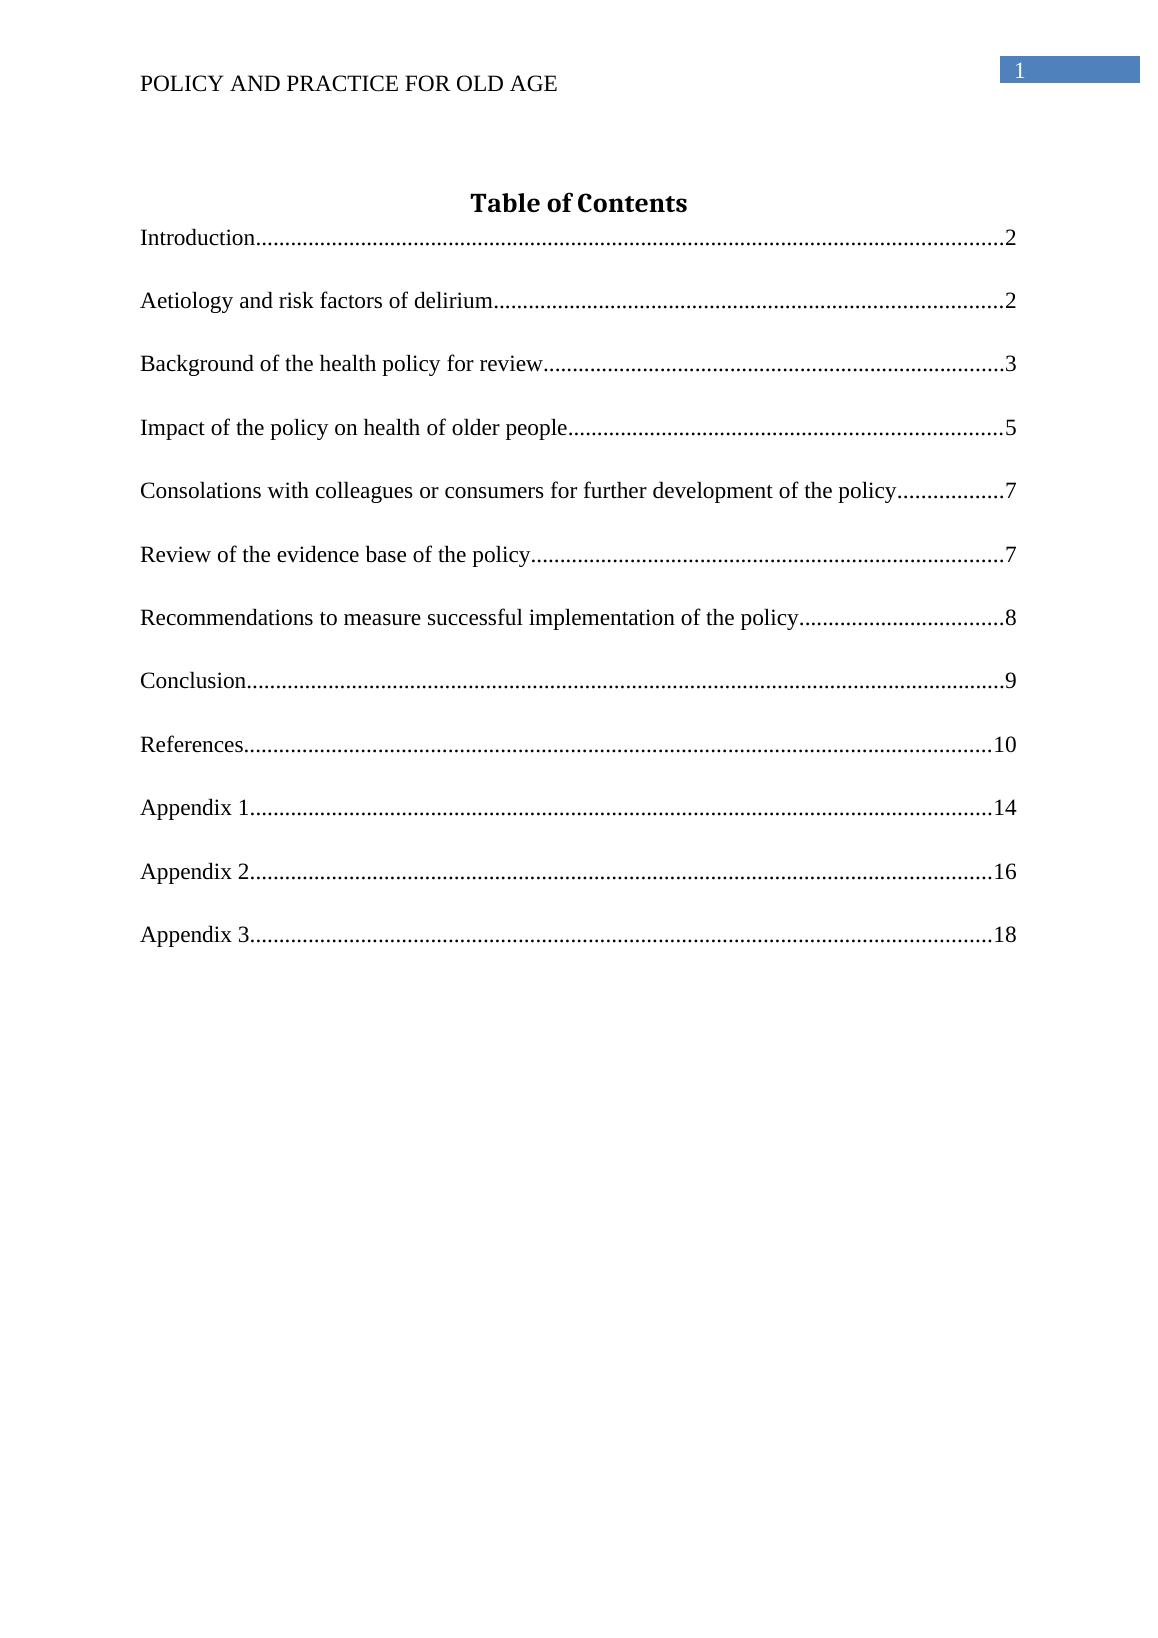 Policies and Practice For Old Age (pdf)_2